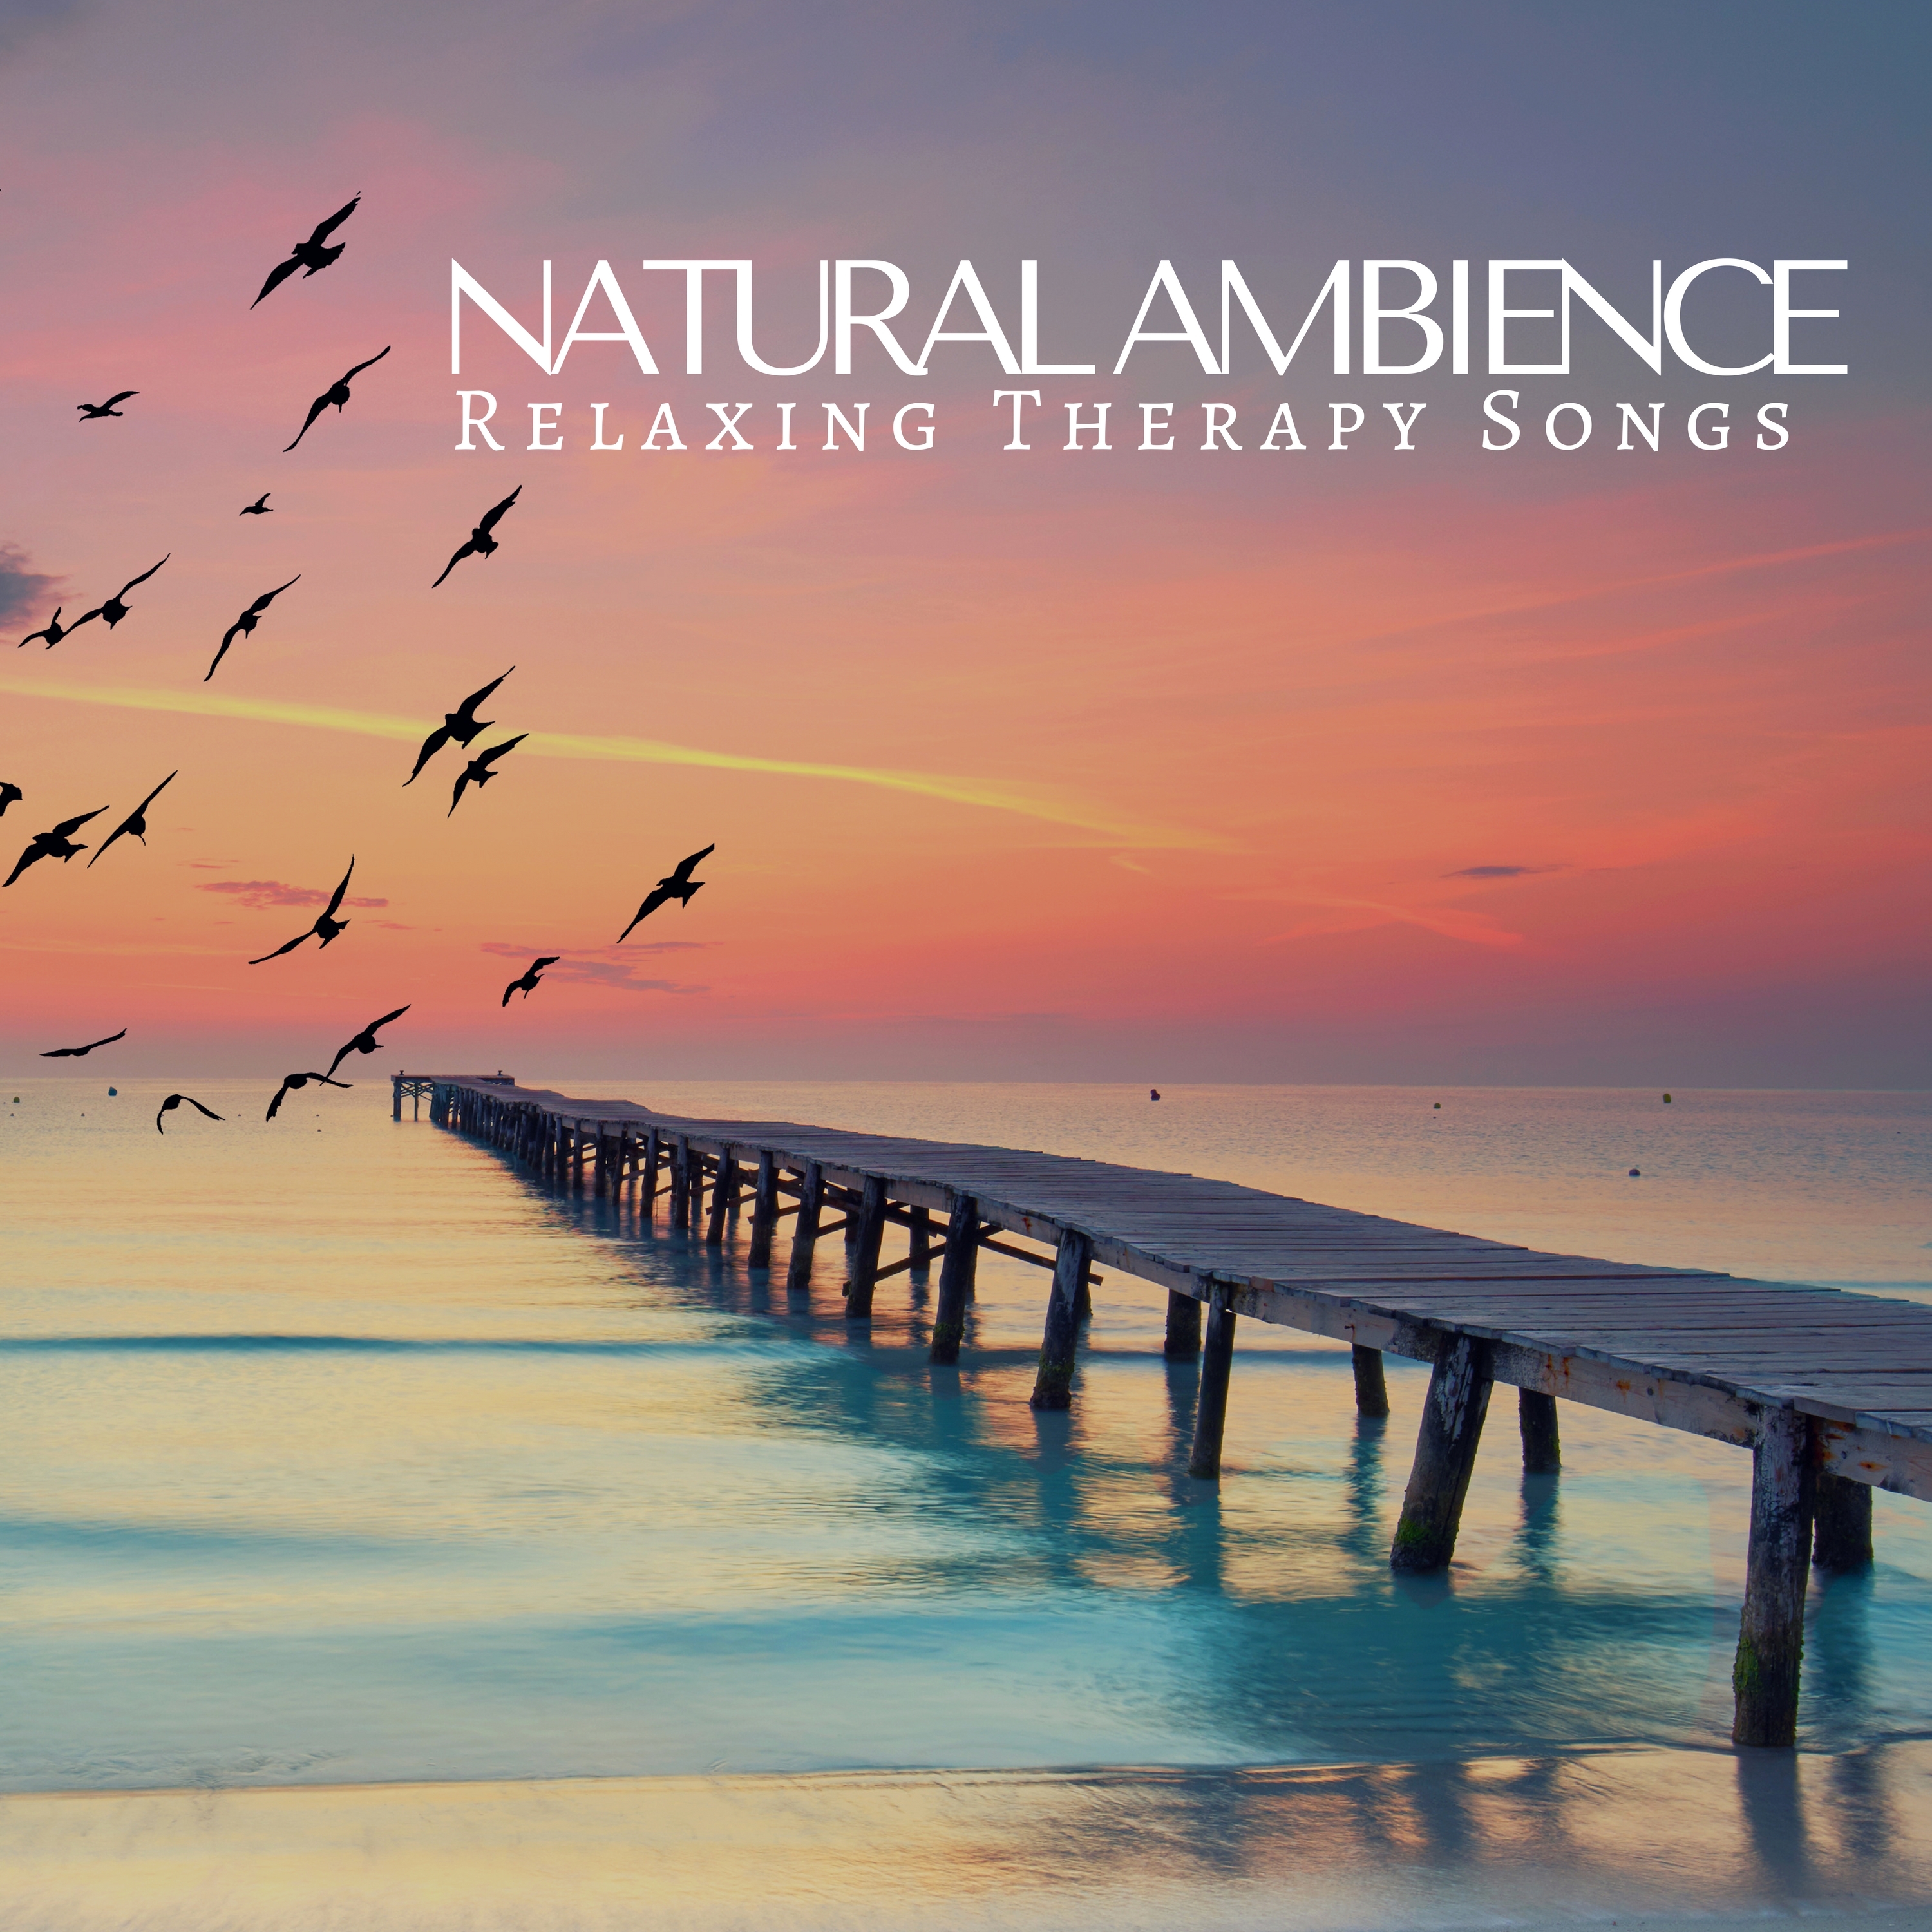 Natural Ambience: Relaxing Therapy Songs, Yoga Meditation, Spa, Massage, Soothing Sounds for Sleep